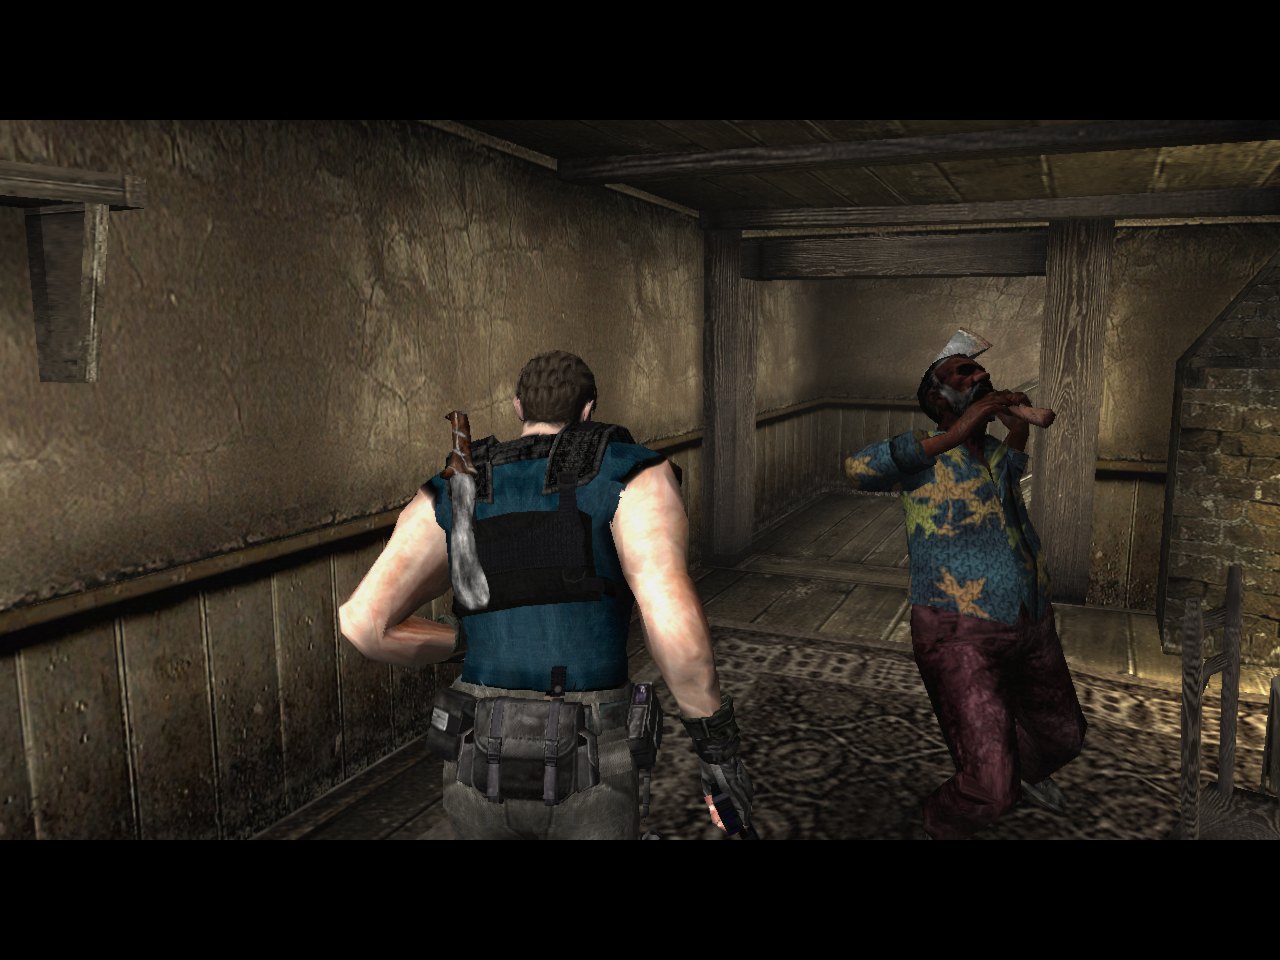 resident evil 4 weapons mod pc free download